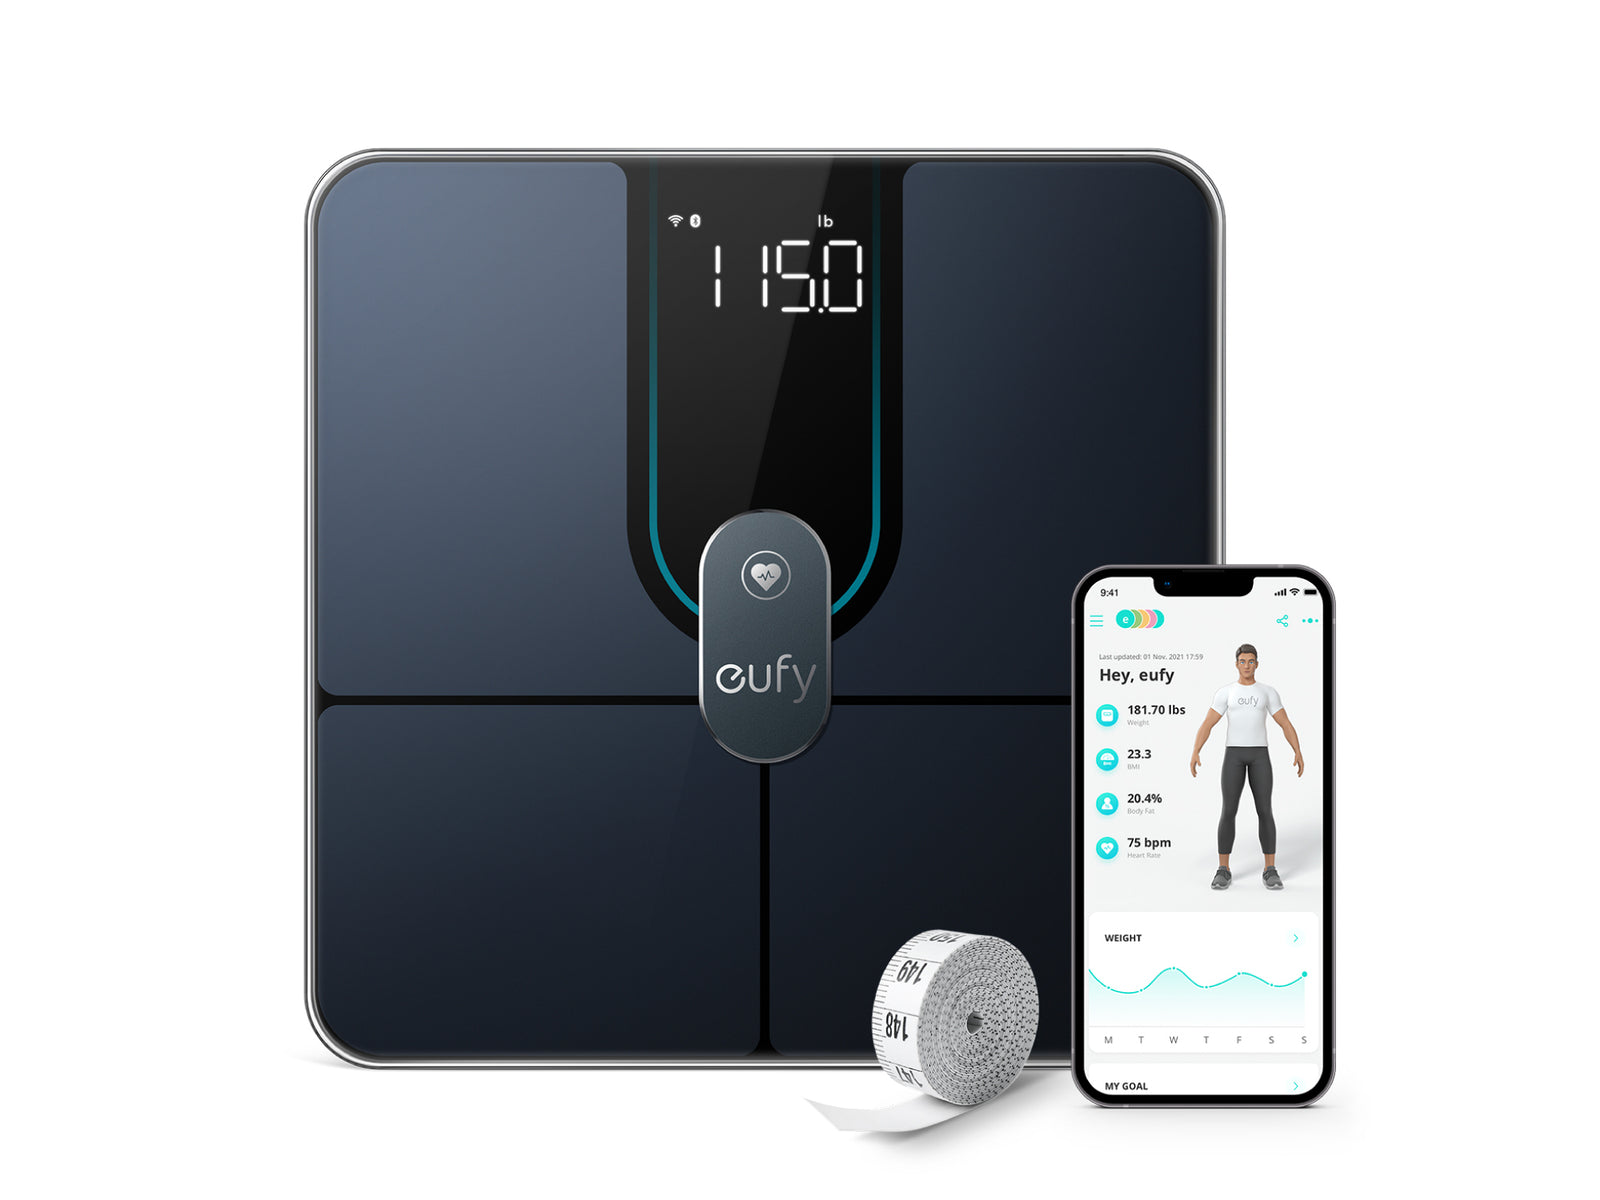 eufy, Smart Scale with Bluetooth, Body Fat Scale, Wireless Digital Bathroom  Scale, 12 Measurements, Weight/Body Fat/BMI, Fitness Body Composition